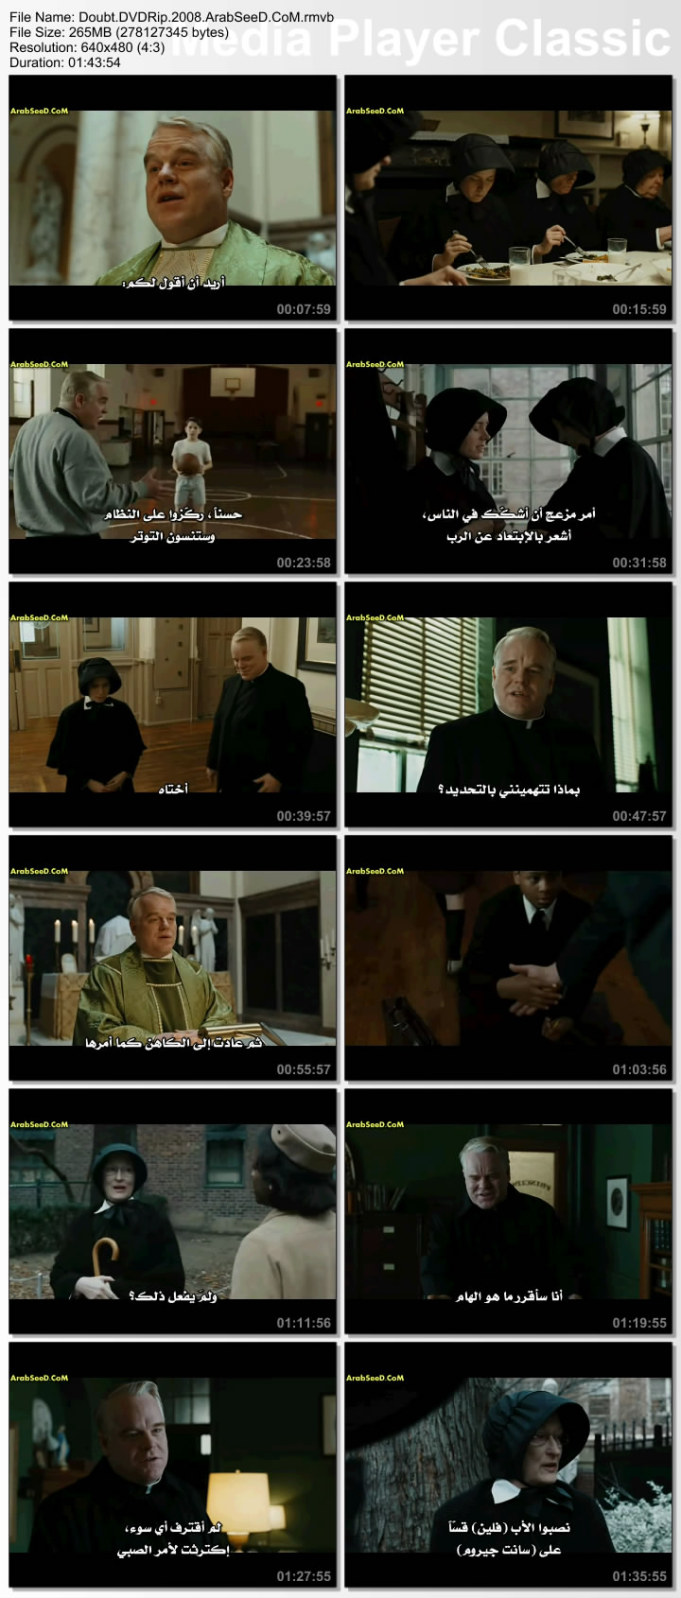   Dvdrip   Doubt 2008  246sy113